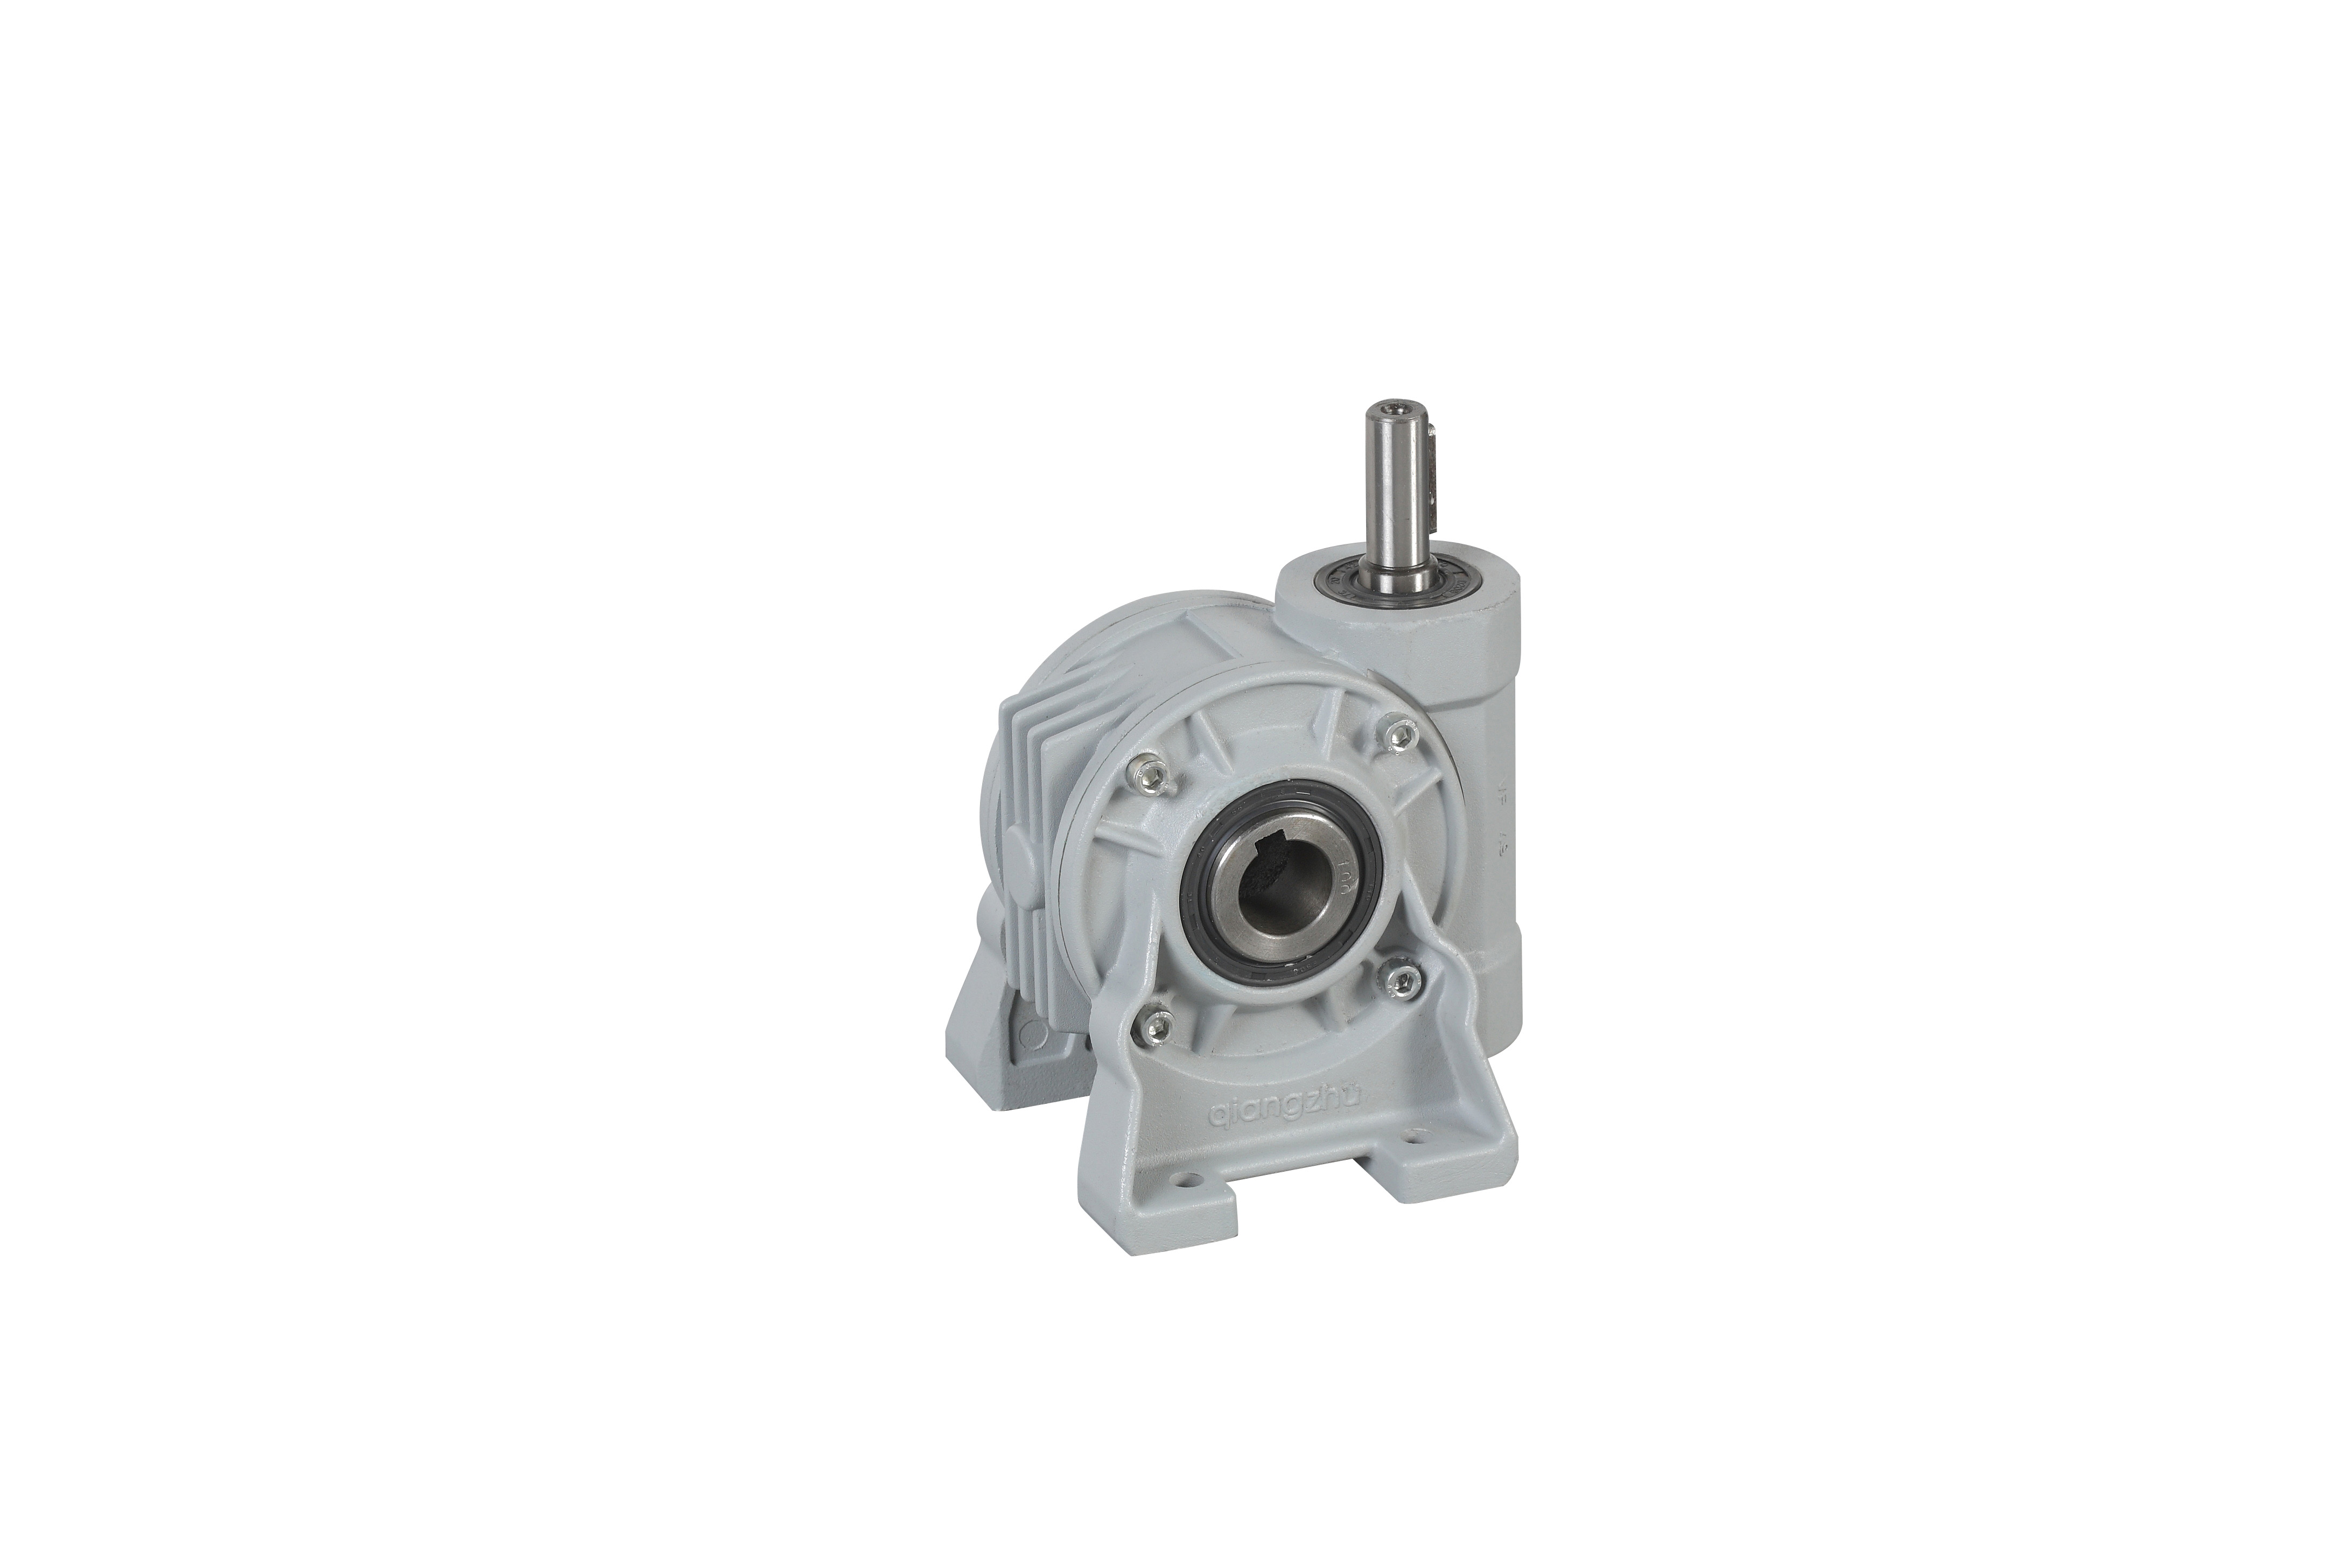 Vf Hollow Output High Torque Reduction Worm Gearbox Transmission